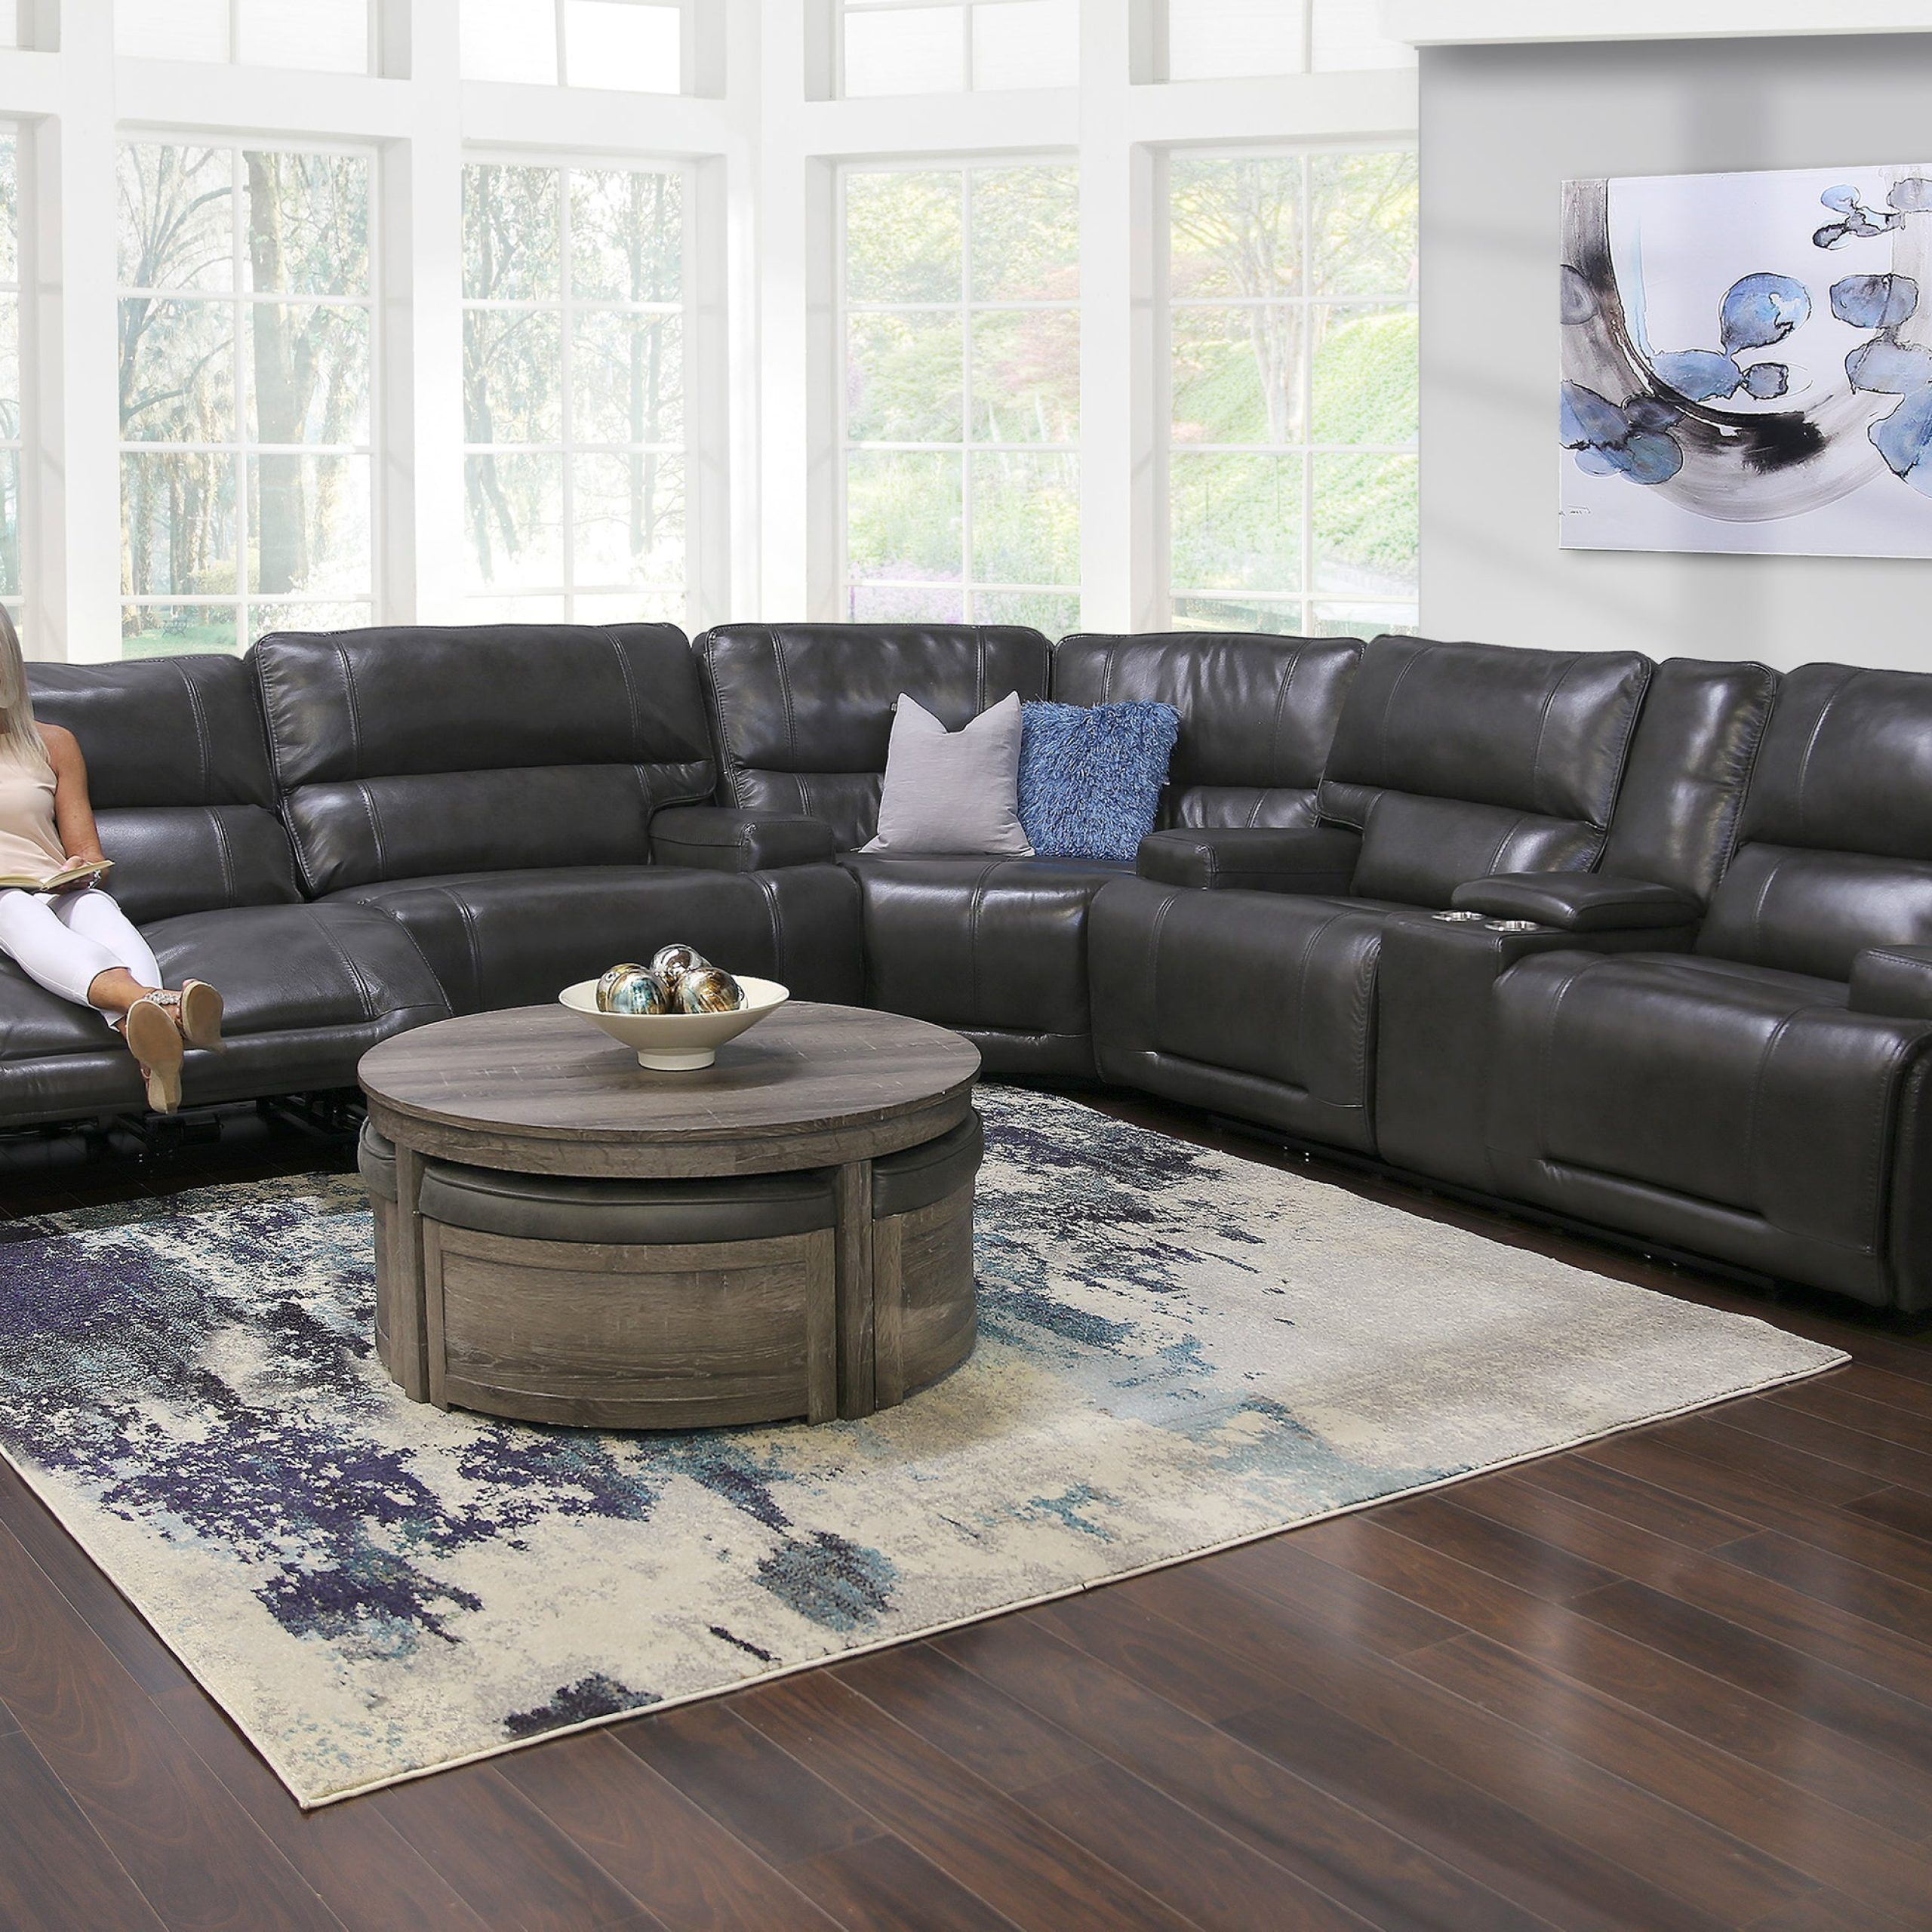 Nova 3 Piece Leather Triple Power Reclining Sectional Sofa With Regard To 3 Piece Leather Sectional Sofa Sets (Gallery 7 of 20)